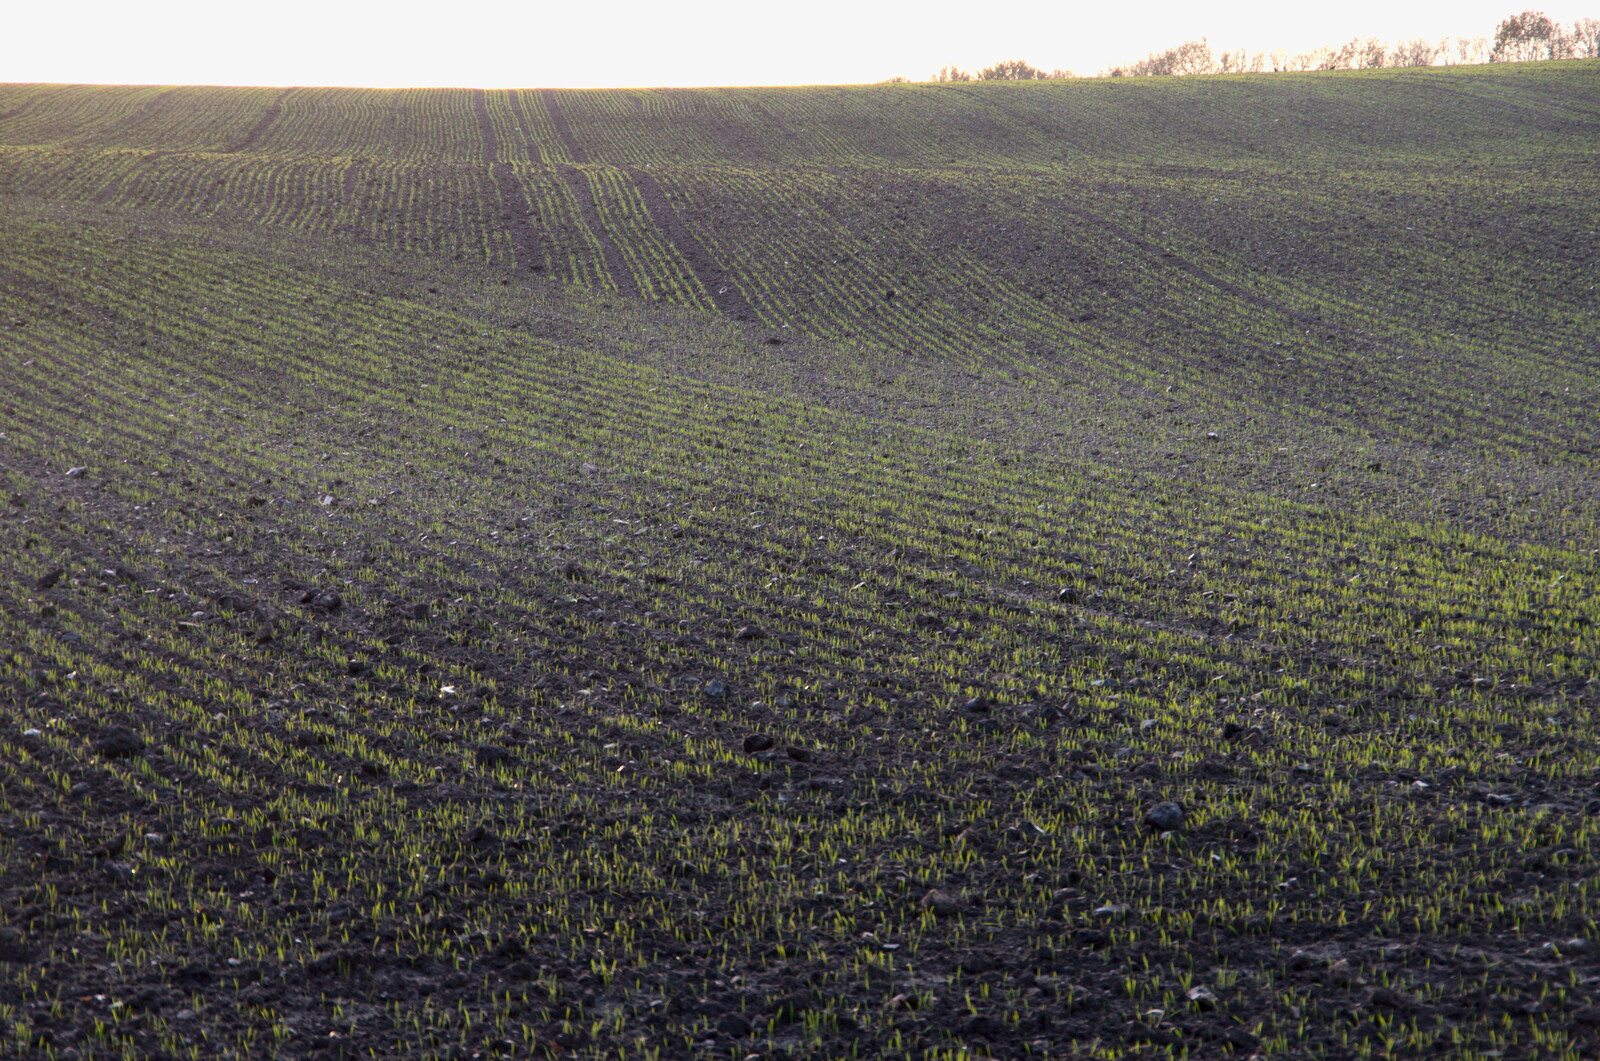 Lines of winter wheat poke up from the soil from The Dereliction of Eye, Suffolk - 22nd November 2020